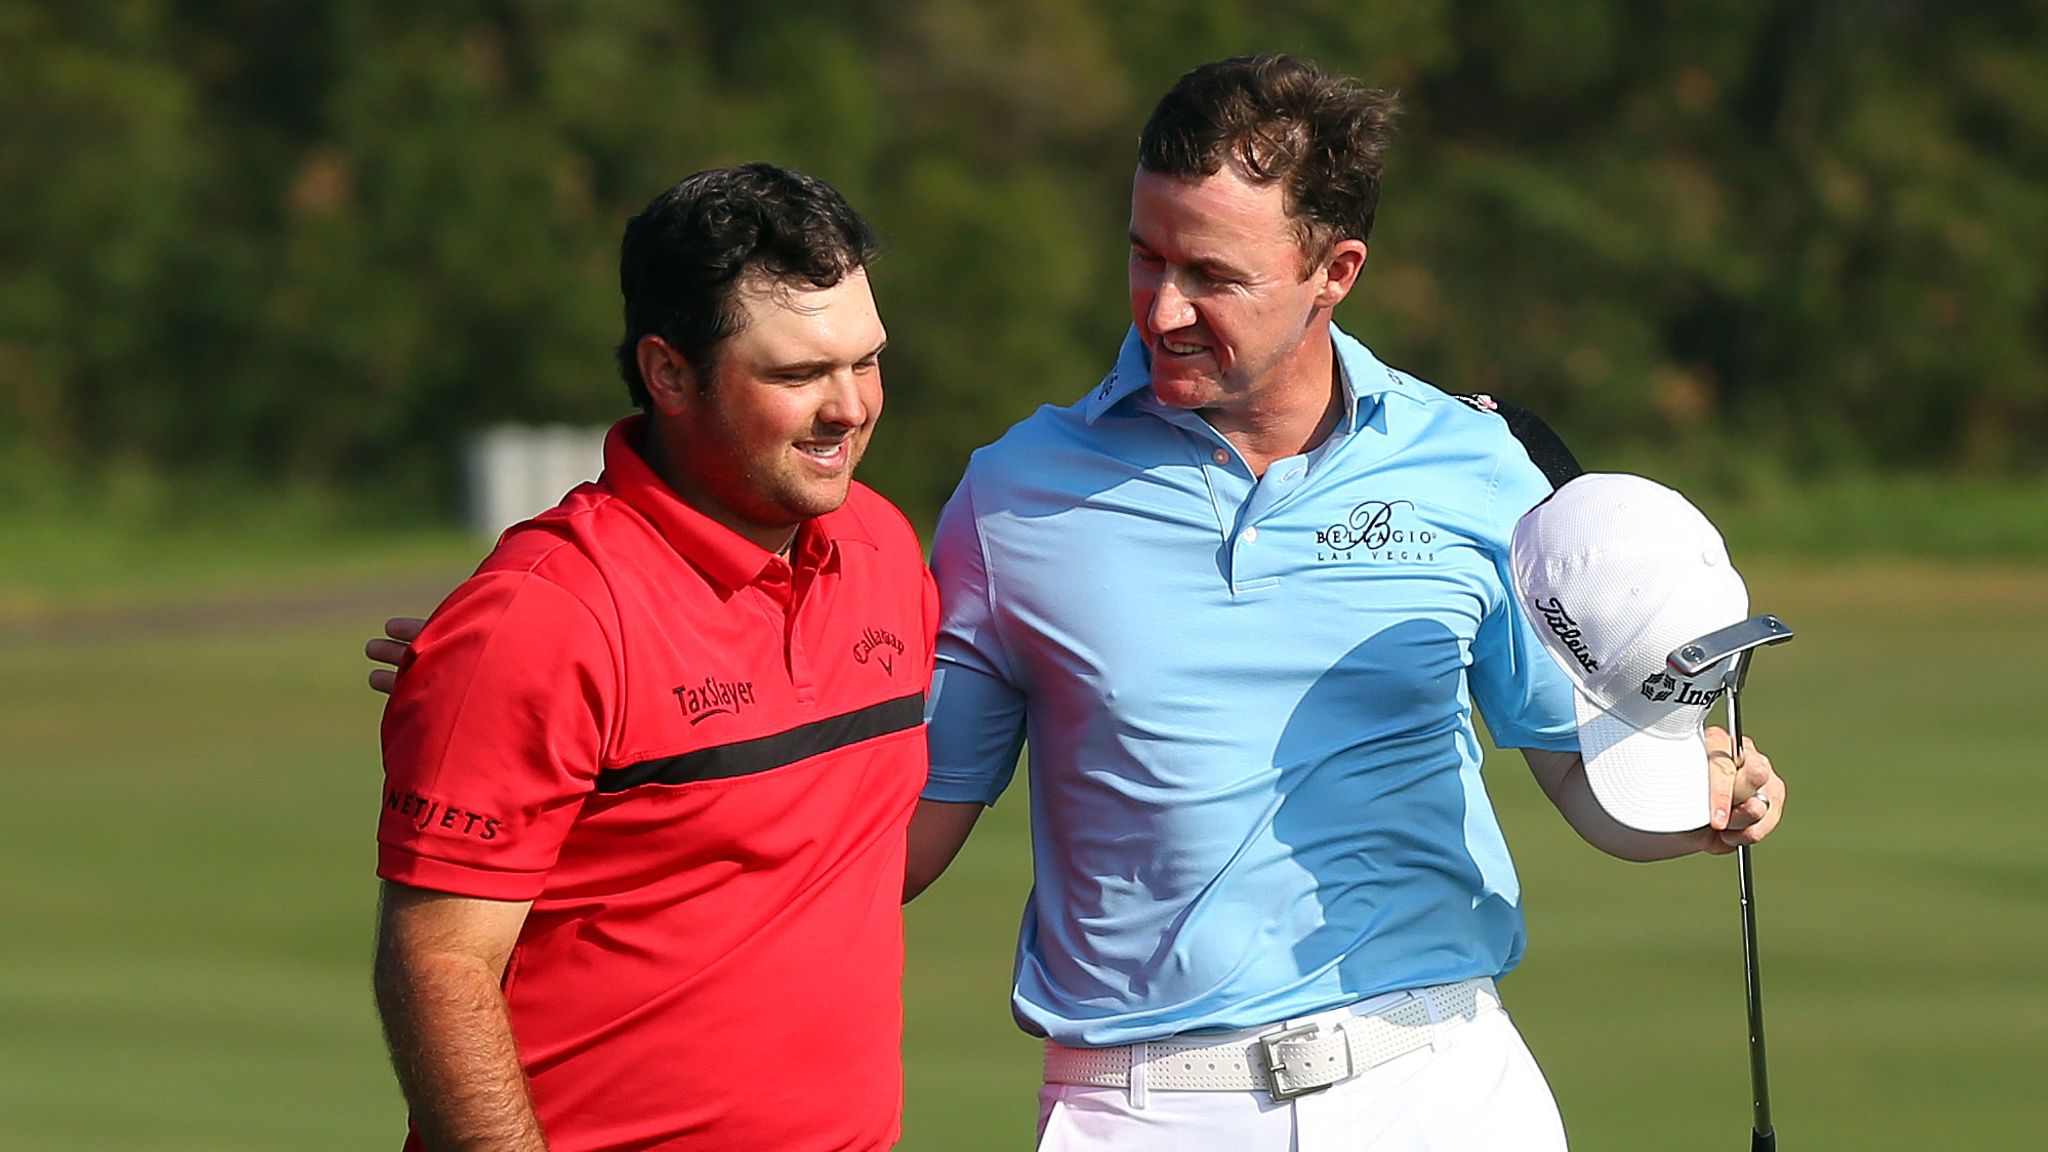 Valero Texas Open Patrick Reed headlines featured group coverage Golf News Sky Sports